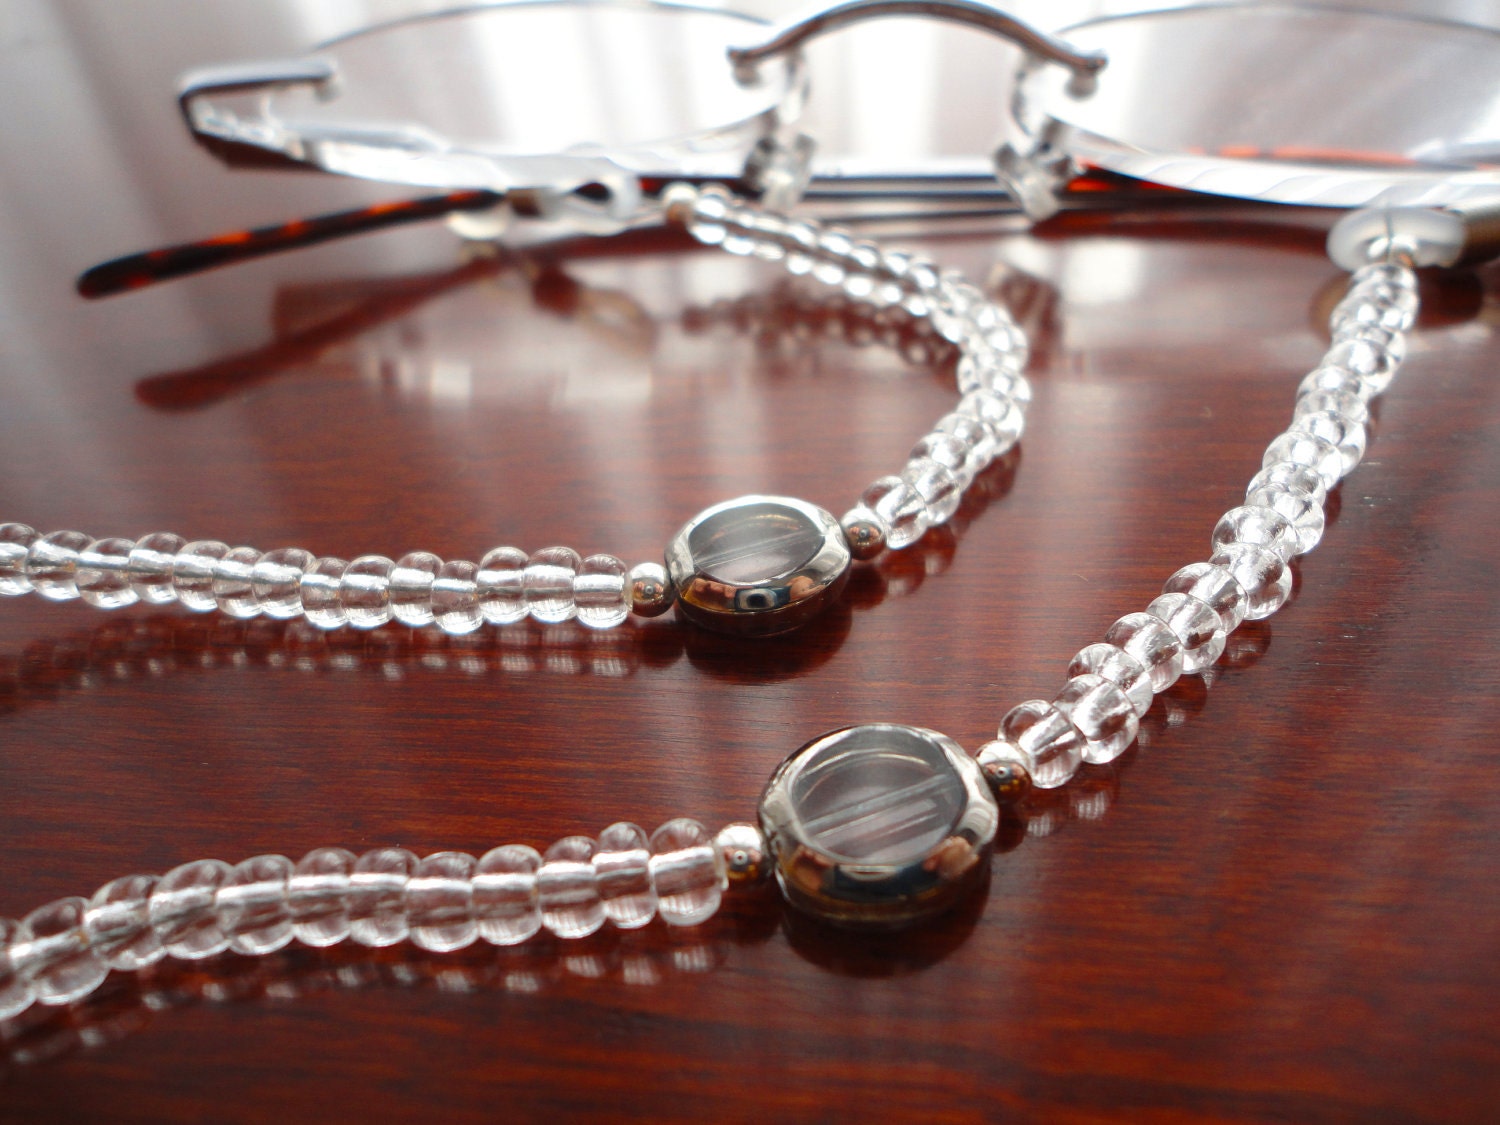 Clear Eyeglass Holder Necklace with Crystal and Pressed Glass Beads